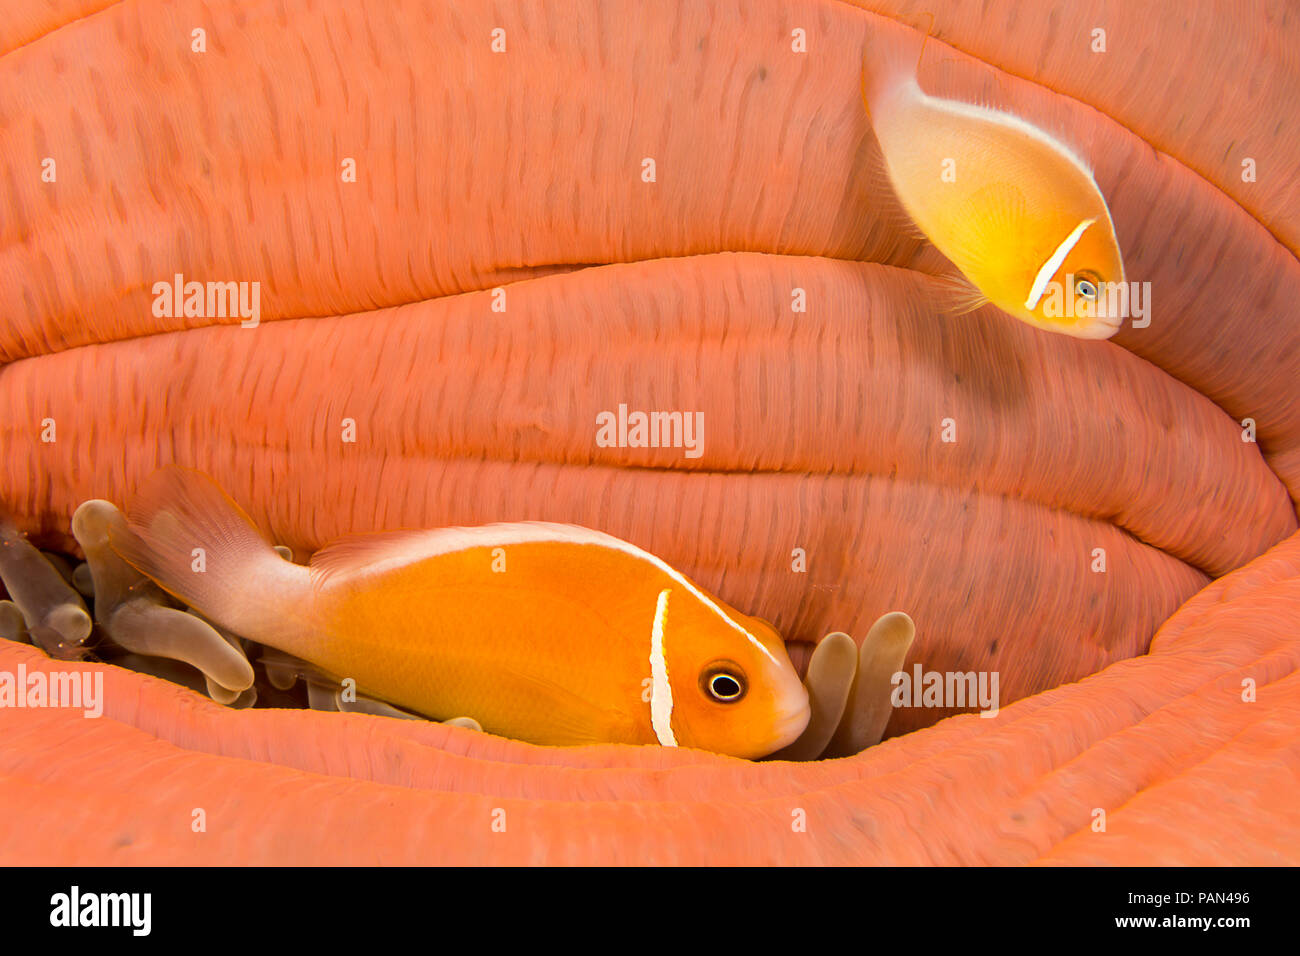 This common anemonefish, Amphiprion perideraion, is most often found associated with the anemone, Heteractis magnifica, as pictured here. This particu Stock Photo